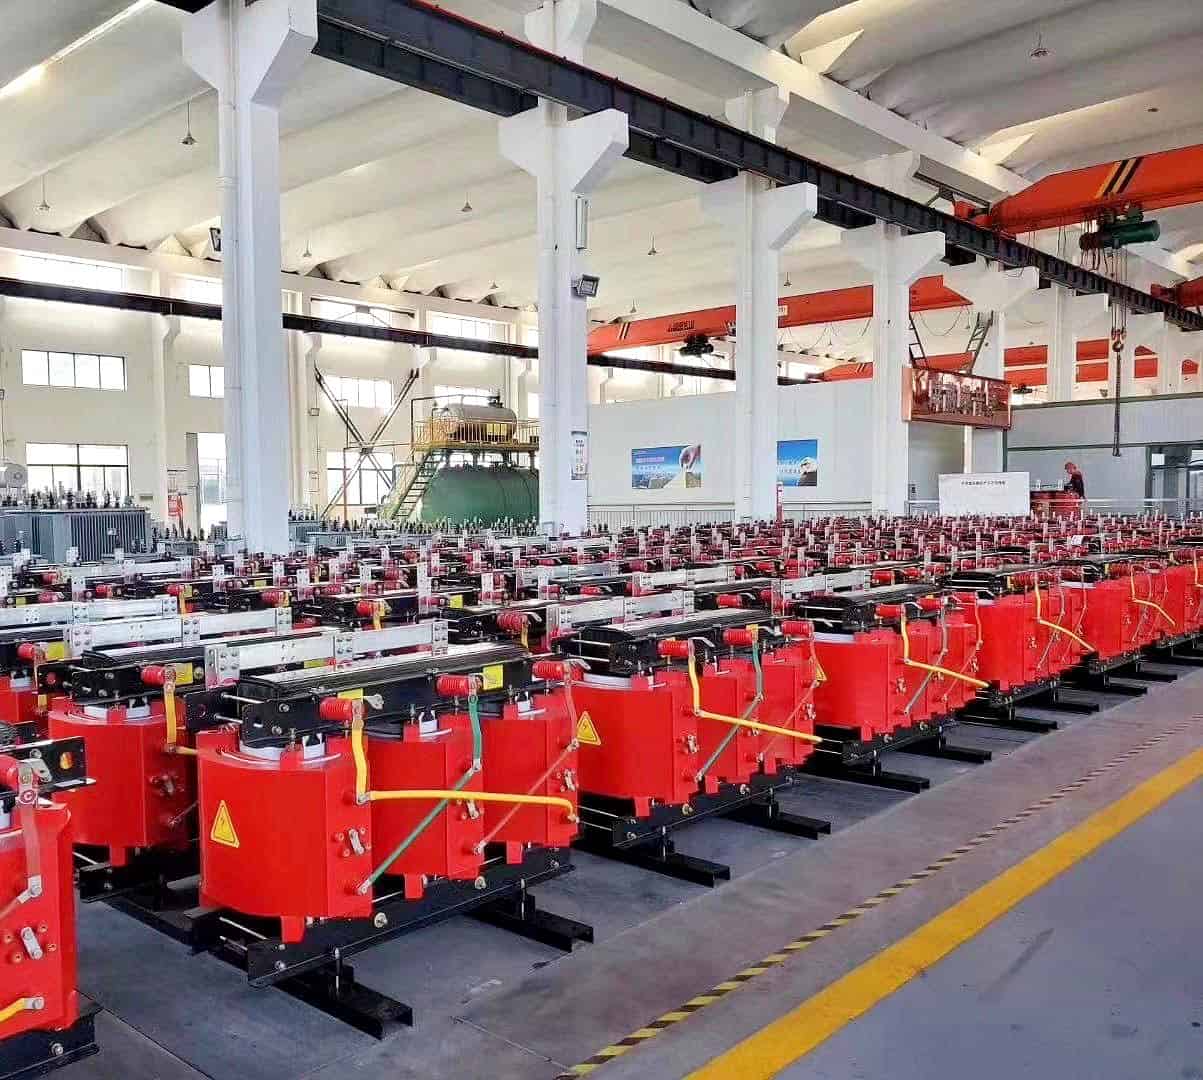 Interior of factory with rows of red dry-type transformers lined up on the production floor